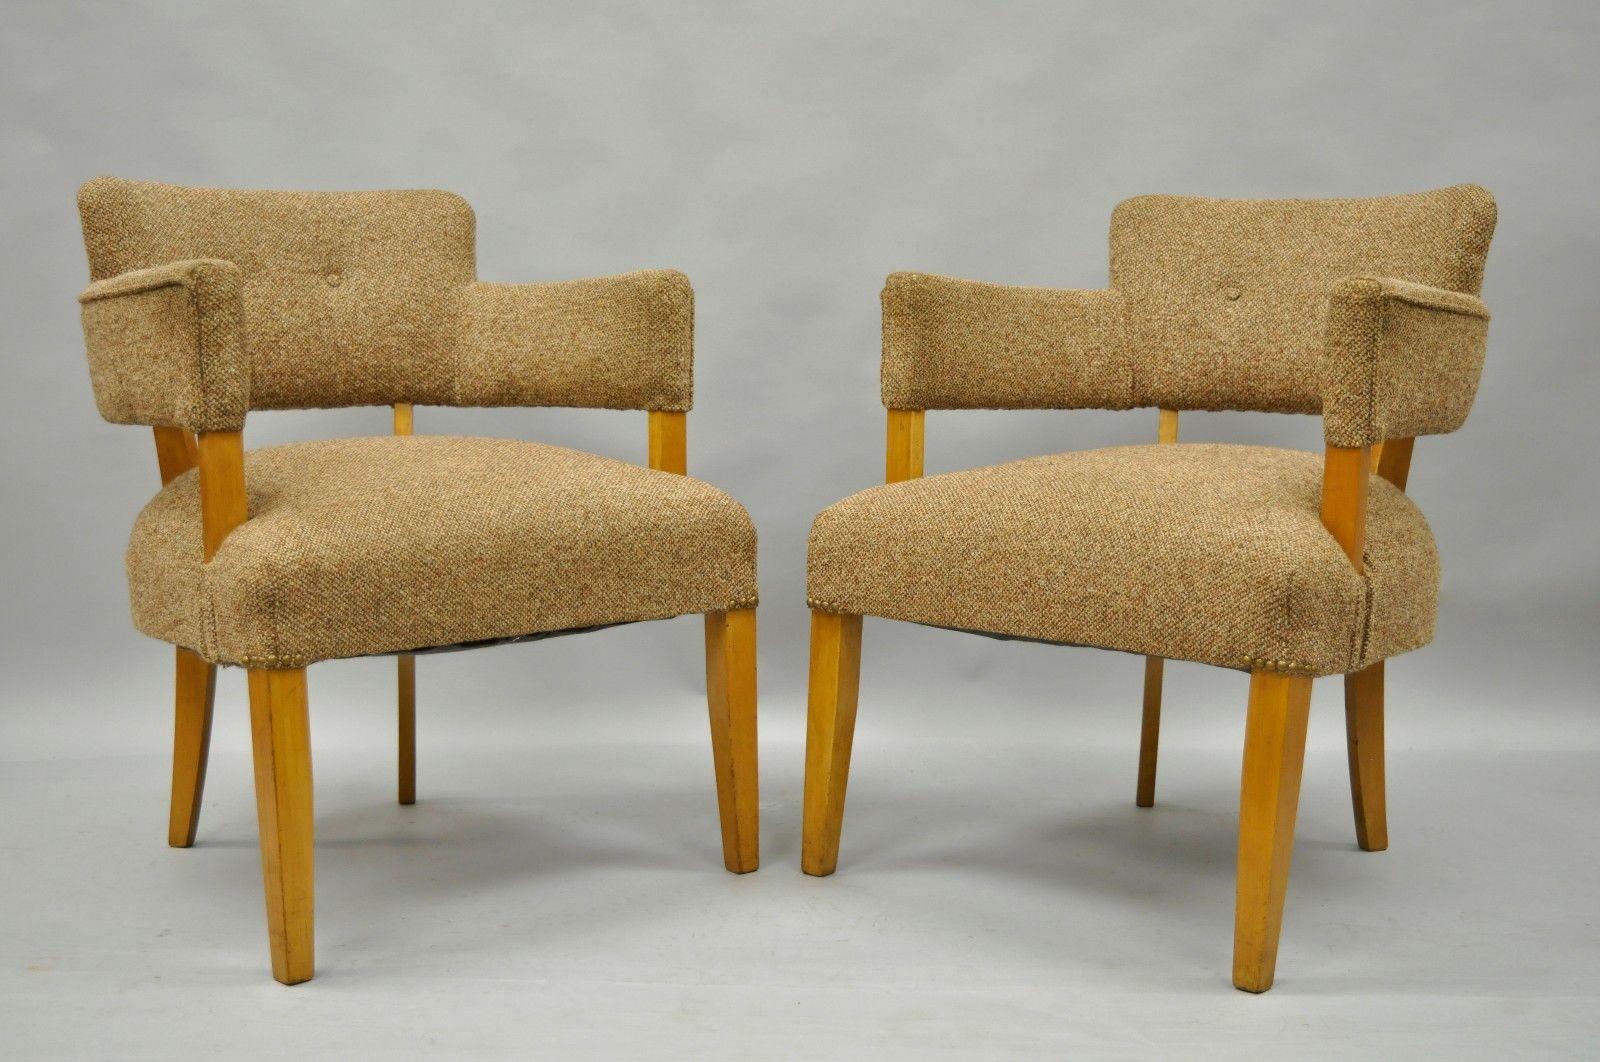 Pair of vintage Mid-Century Modern maple wood club chairs in the manner of Jens Risom and Heywood Wakefield. Item features solid wood frames, tapered legs, upholstered back and seats, great sculptural form, and quality vintage chairs, circa